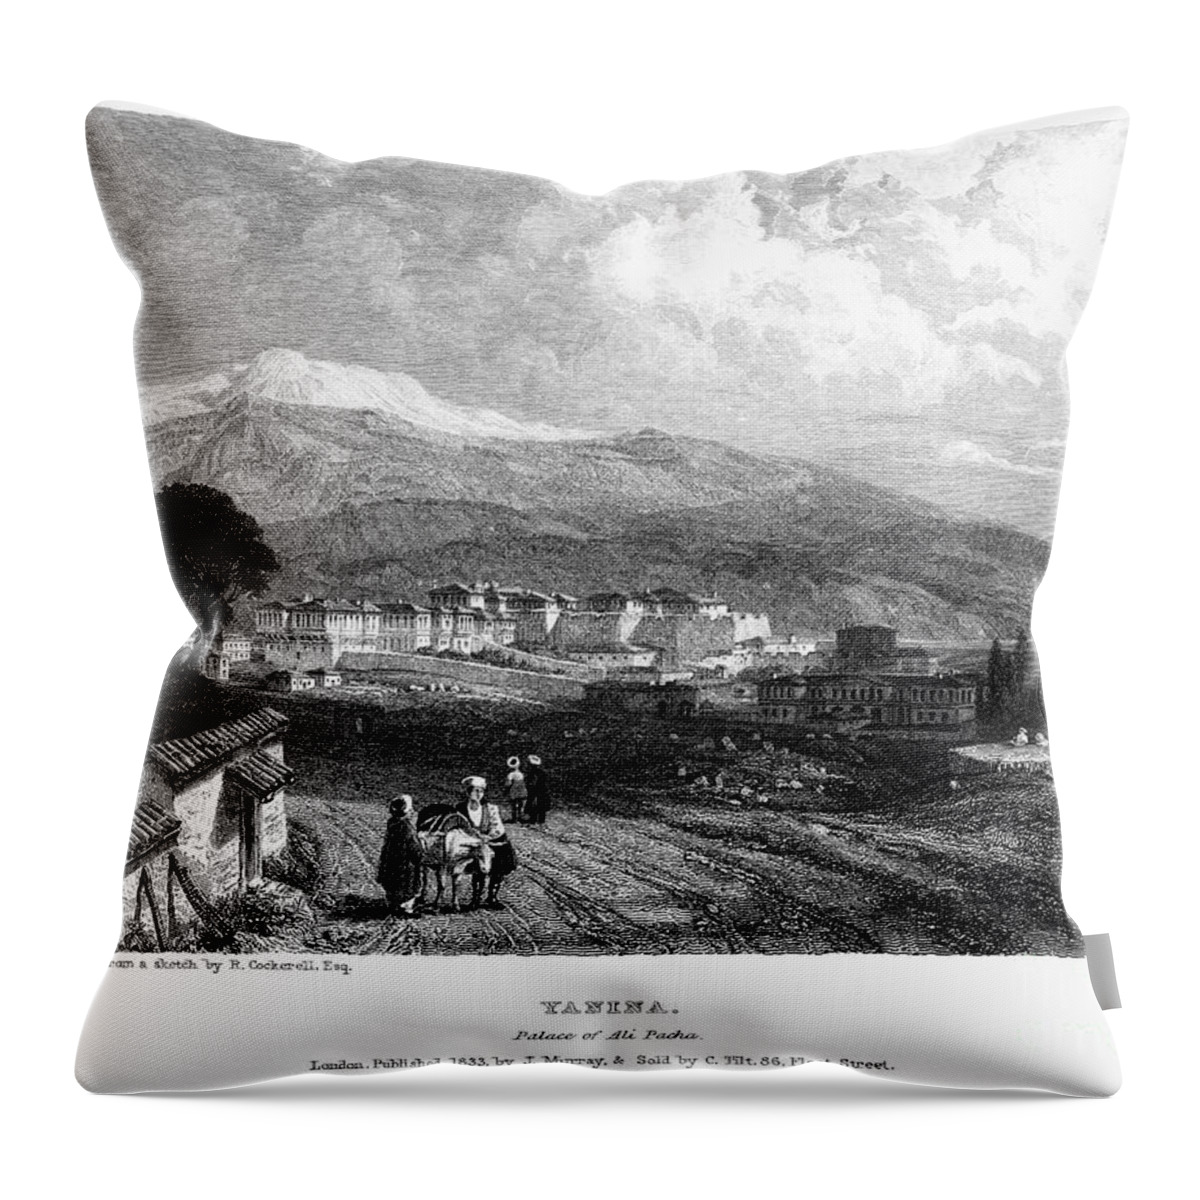 1833 Throw Pillow featuring the photograph Greece: Yanina, 1833 by Granger